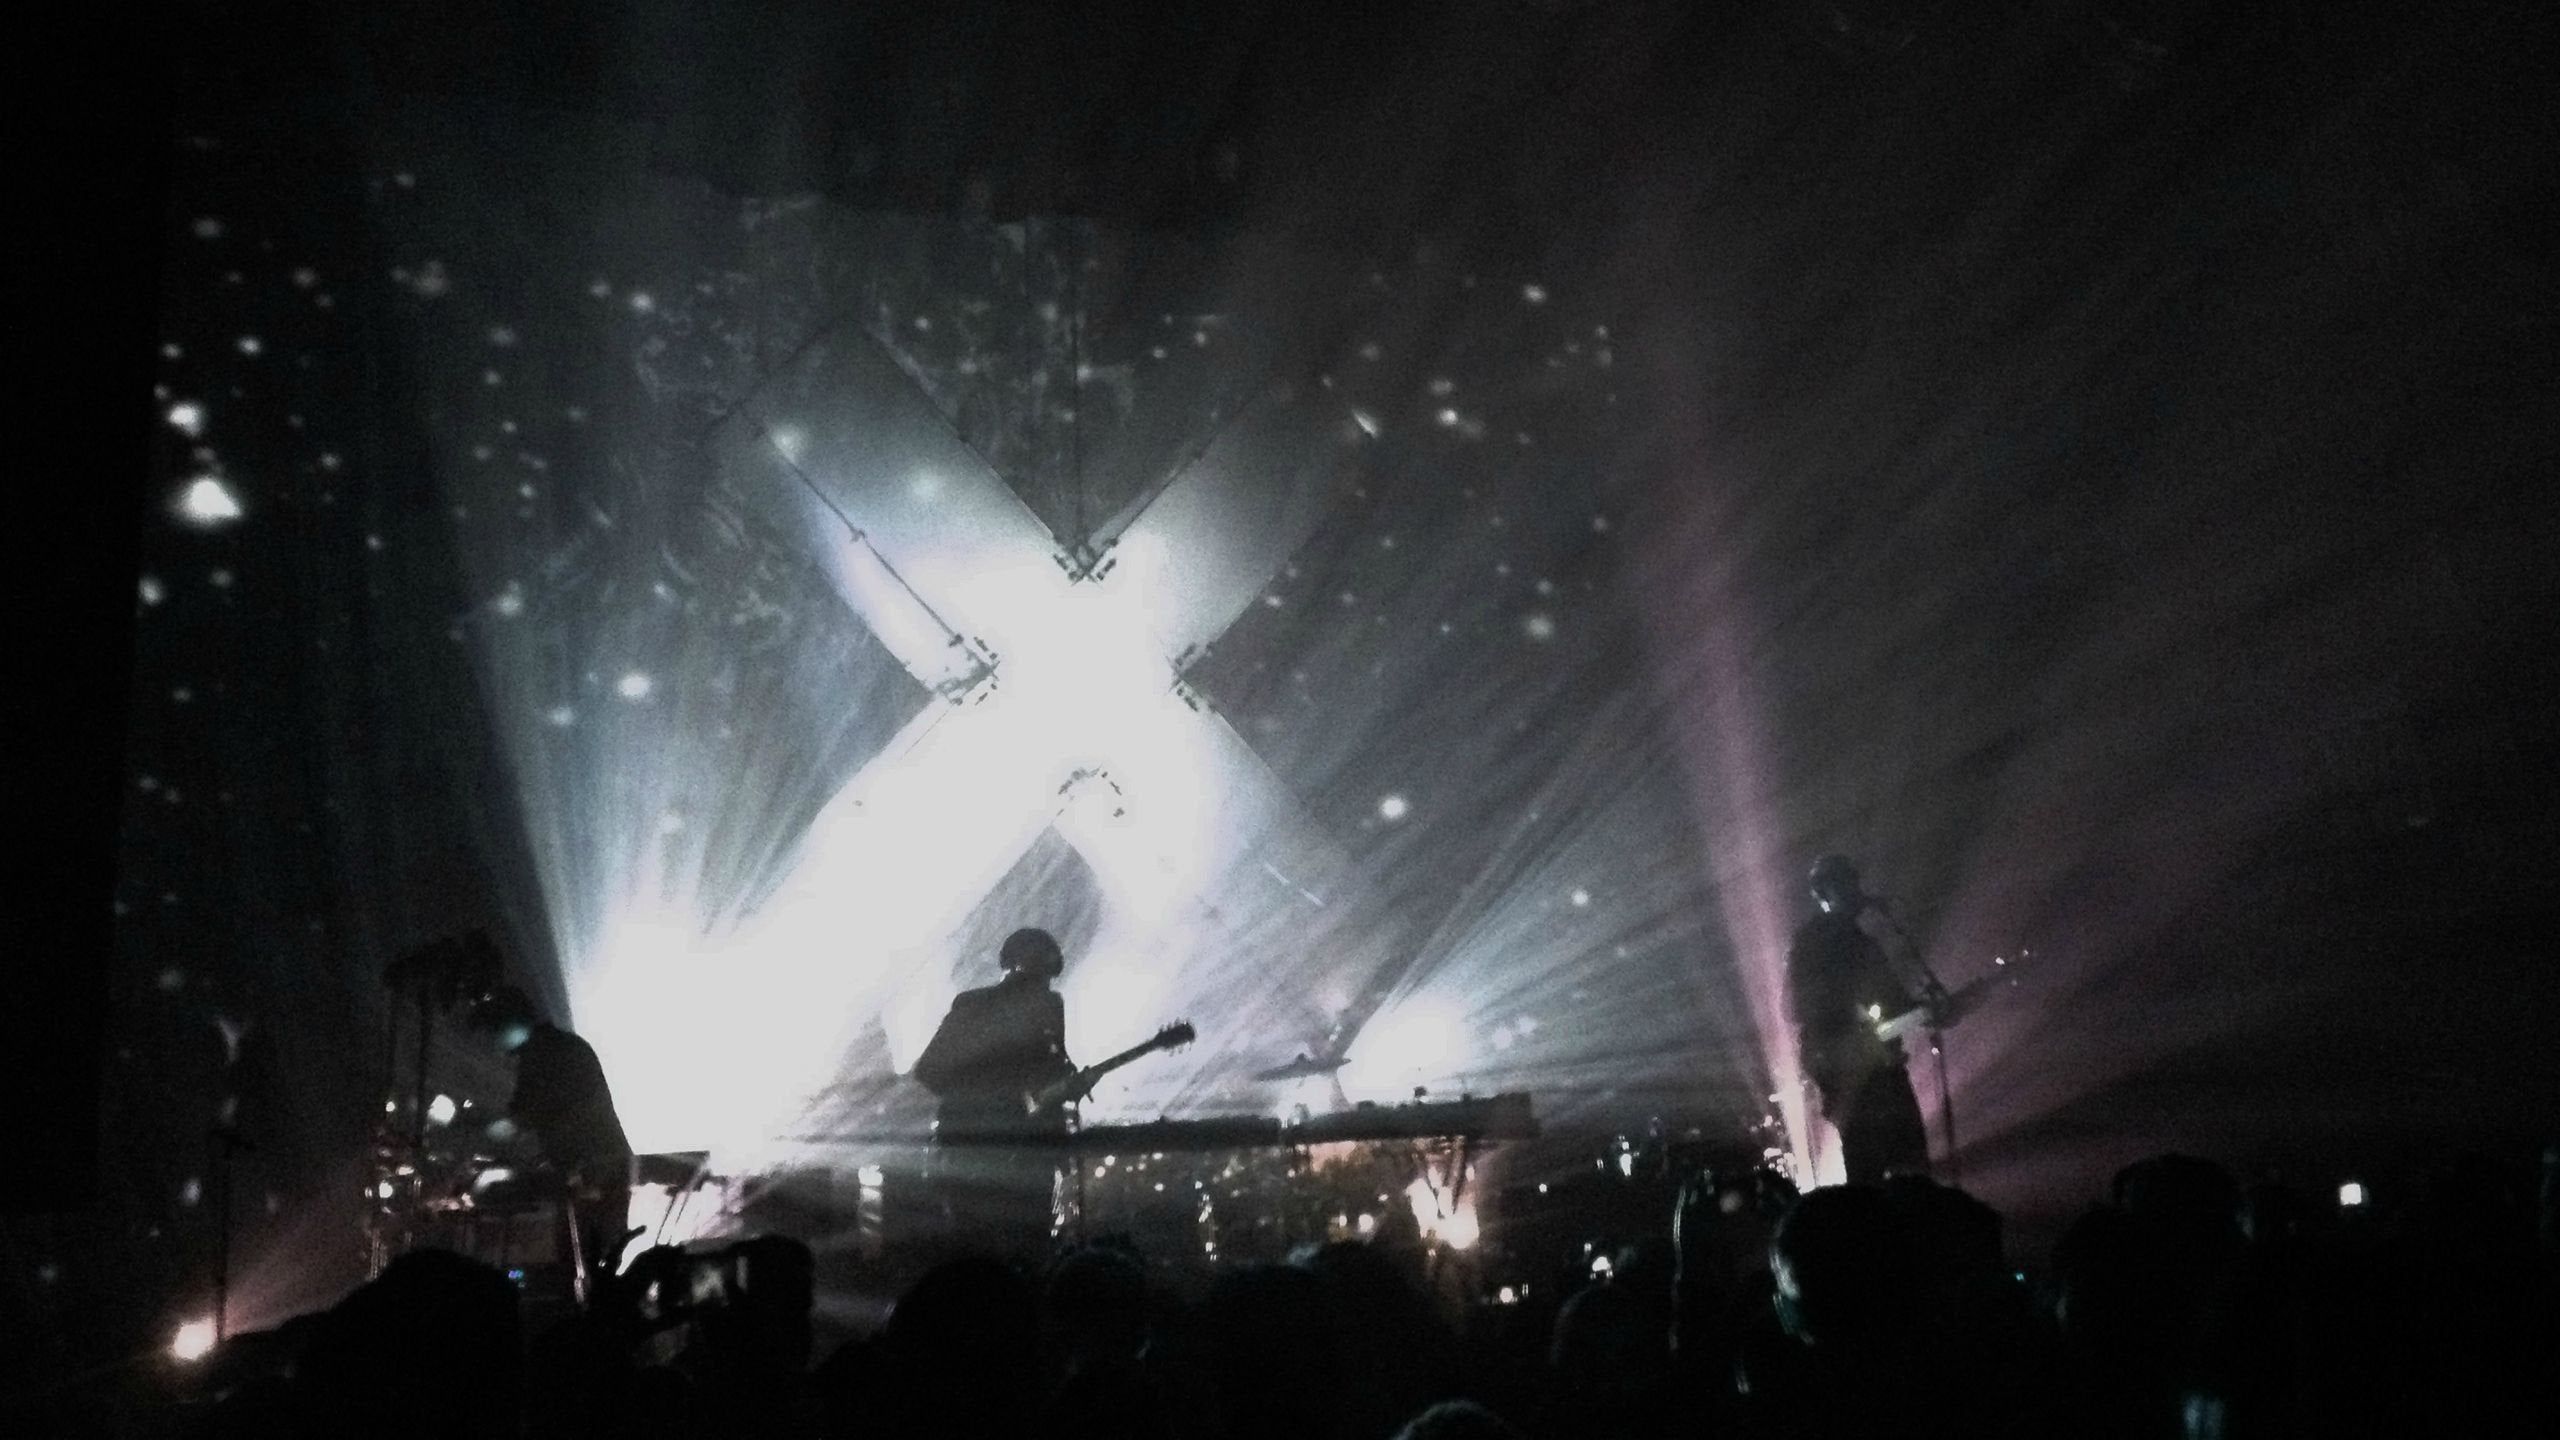 The XX live on stage [2560x1440]